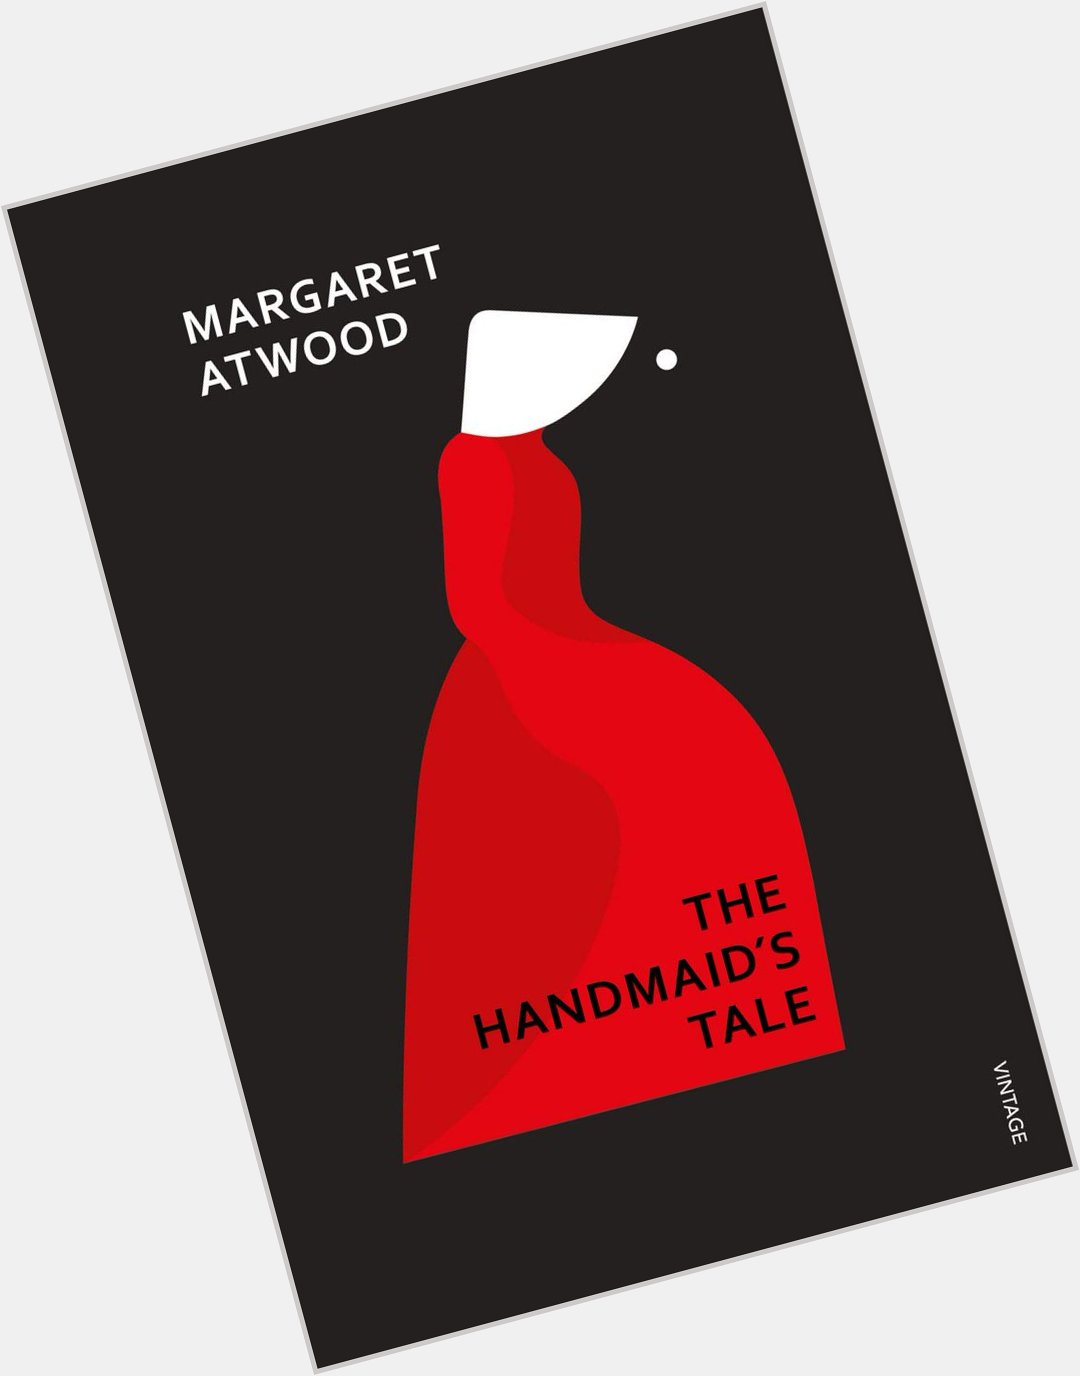 Happy 80th birthday to Margaret Atwood  